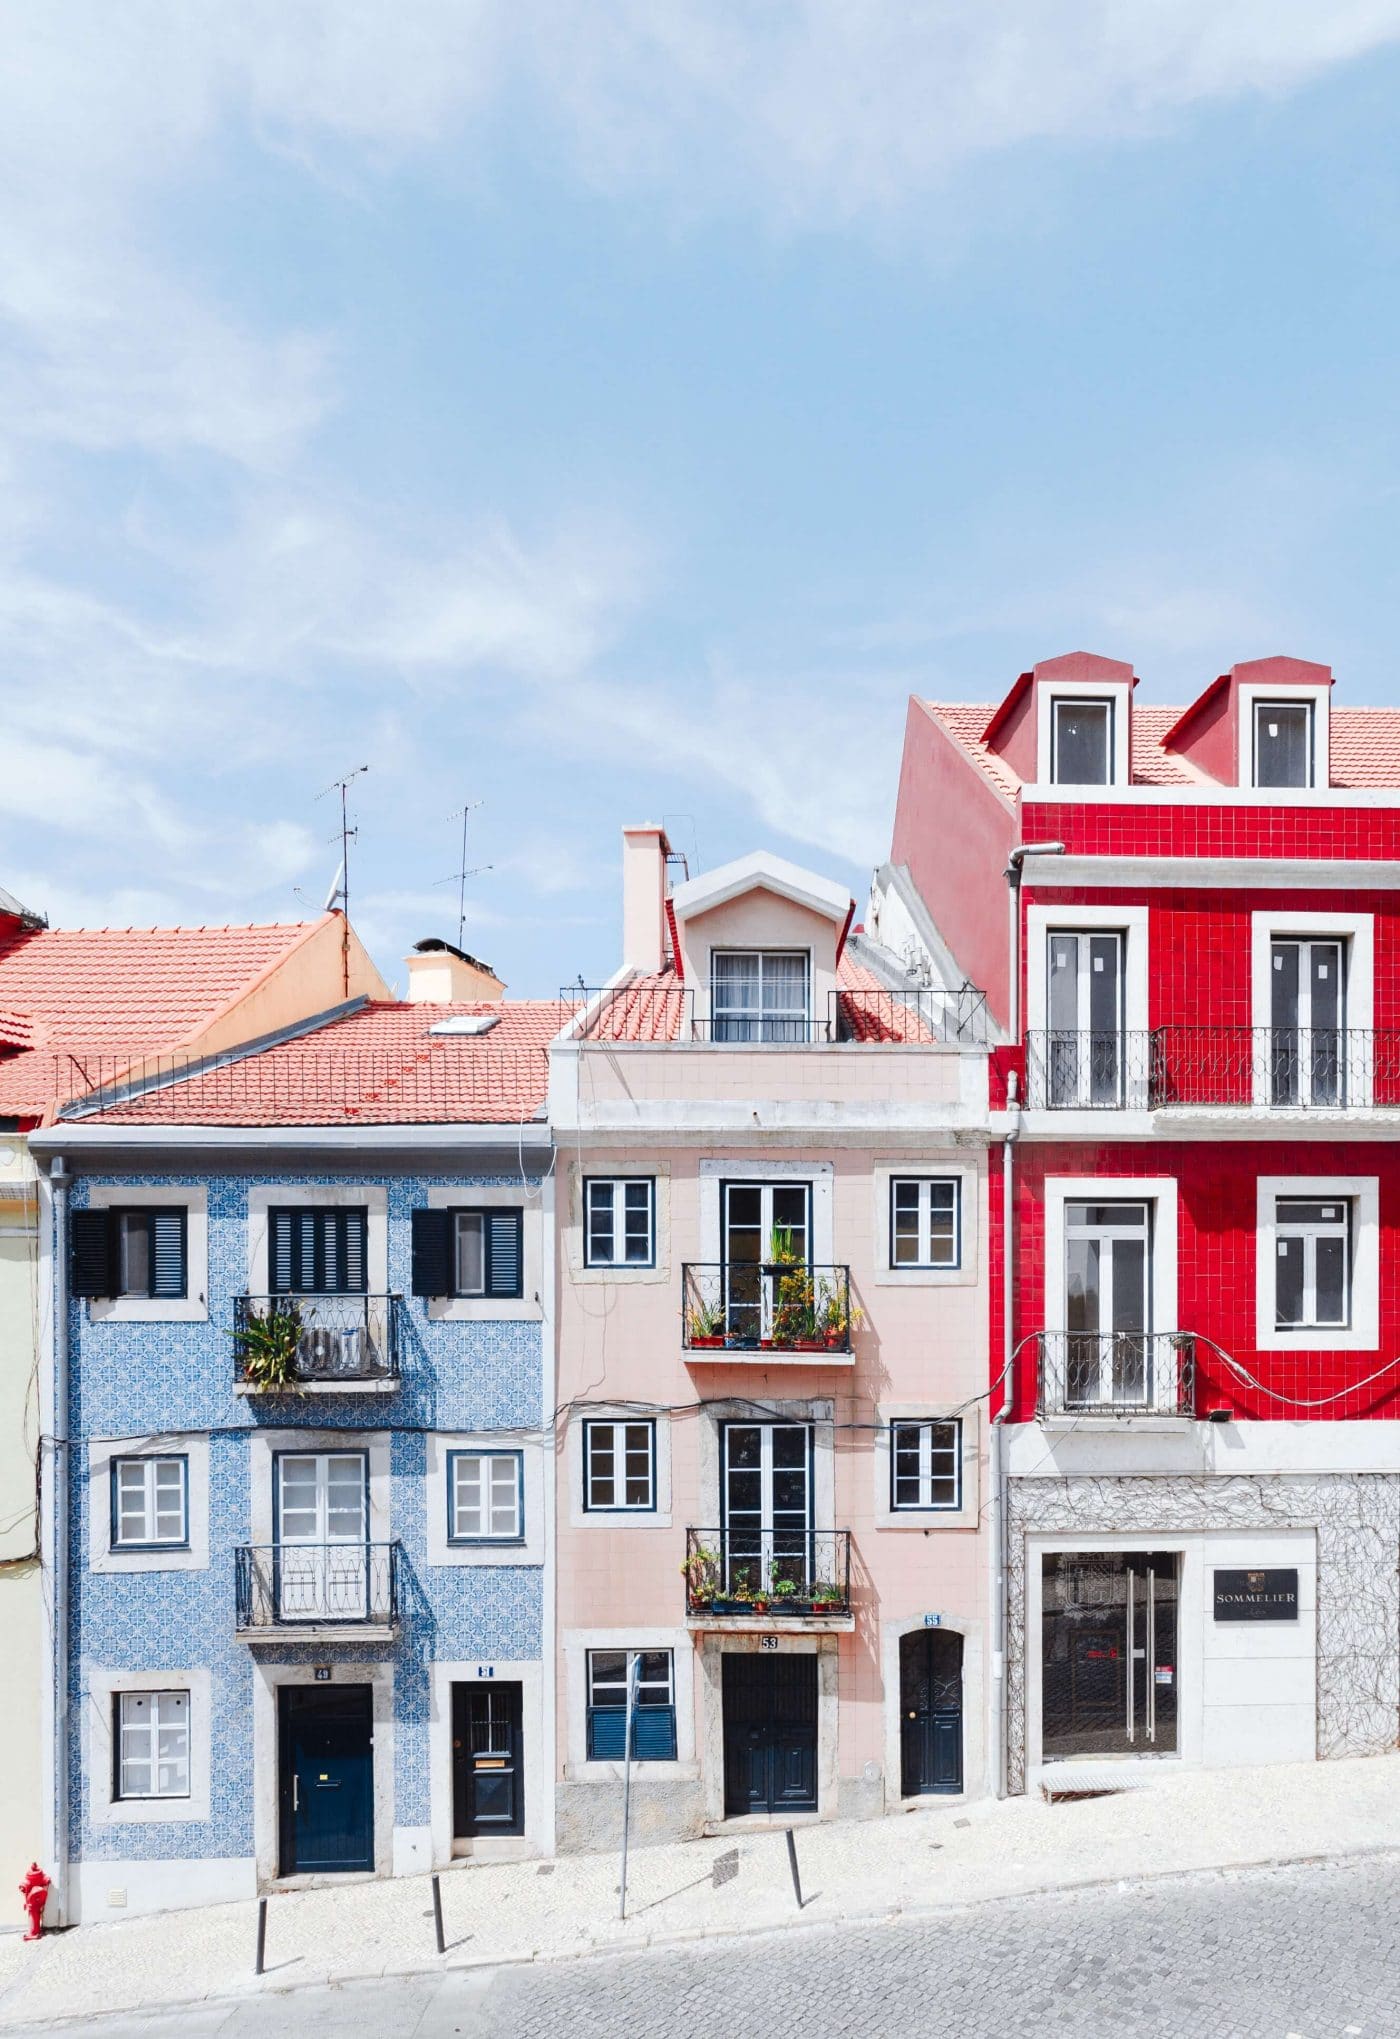 Postcard from Portugal: Row Houses in Lisbon